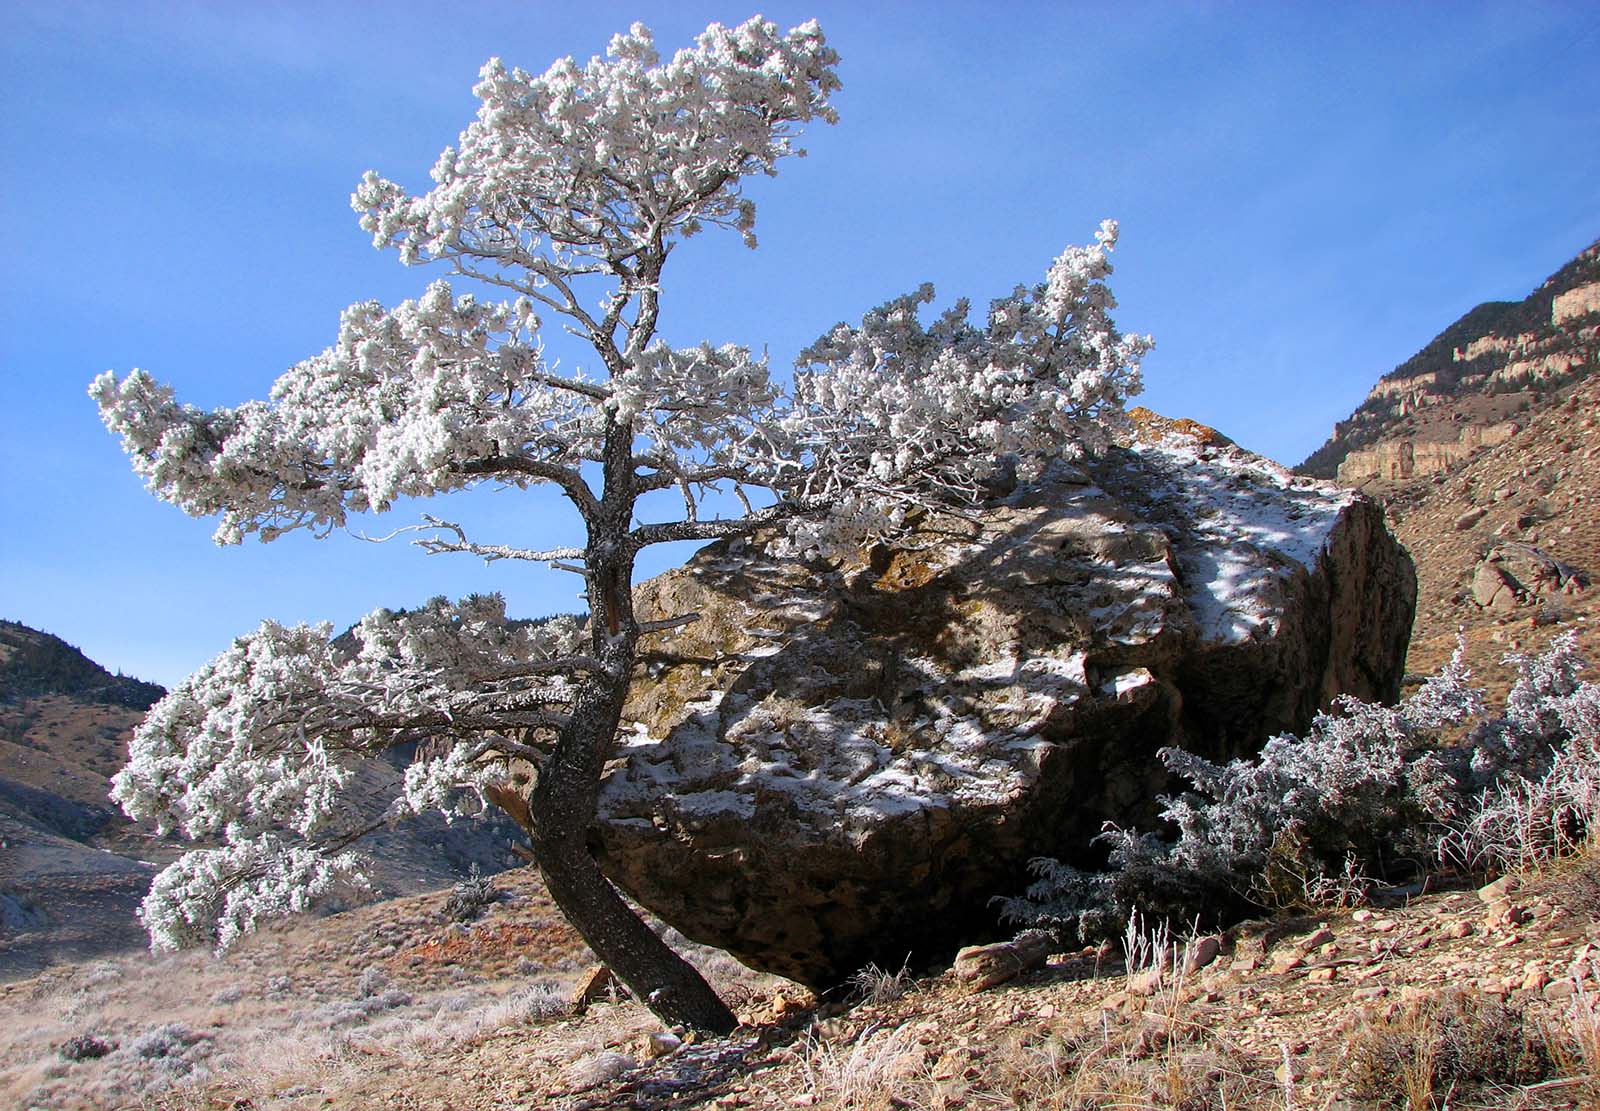 Frosted tree and rock. Photo by Mack Frost.